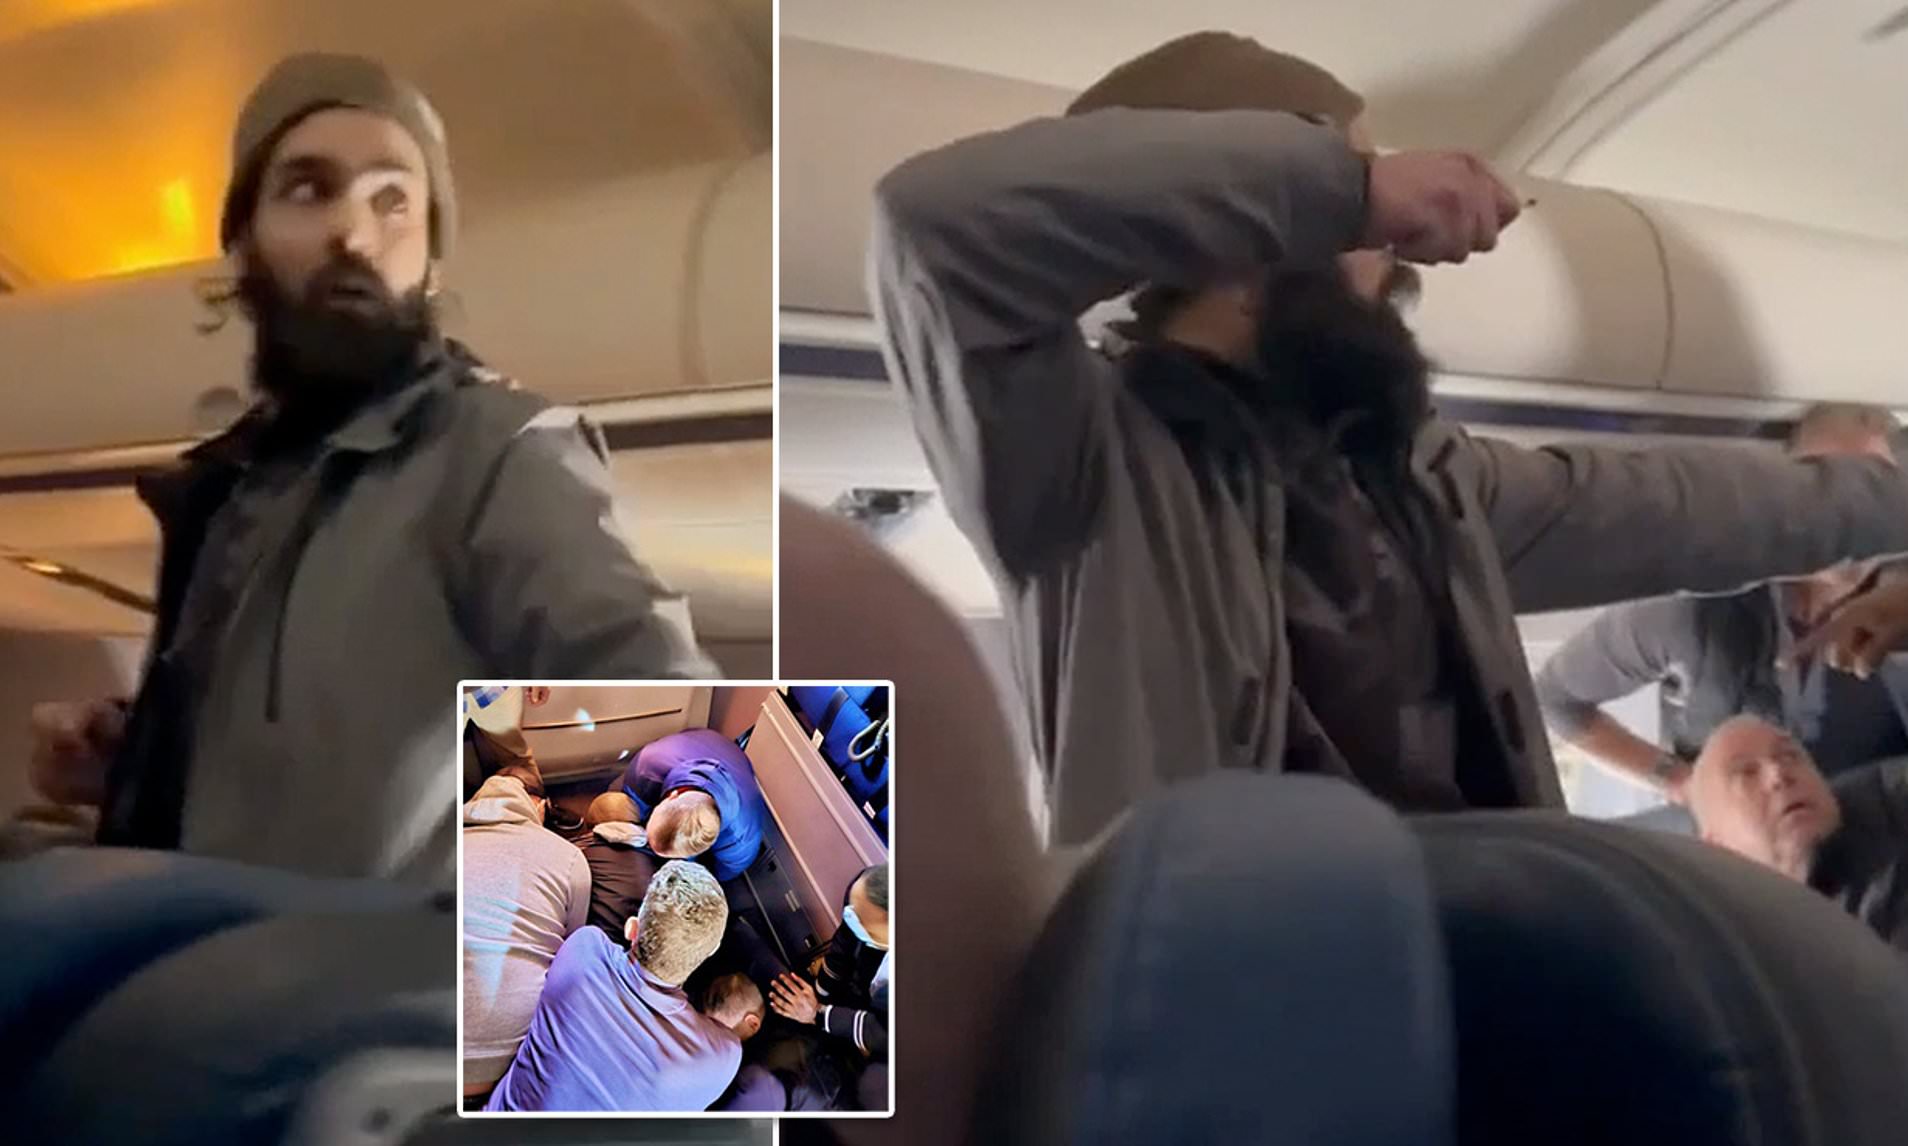 Terrifying footage released shows a man threatening to kill passengers on a United Airlines plane